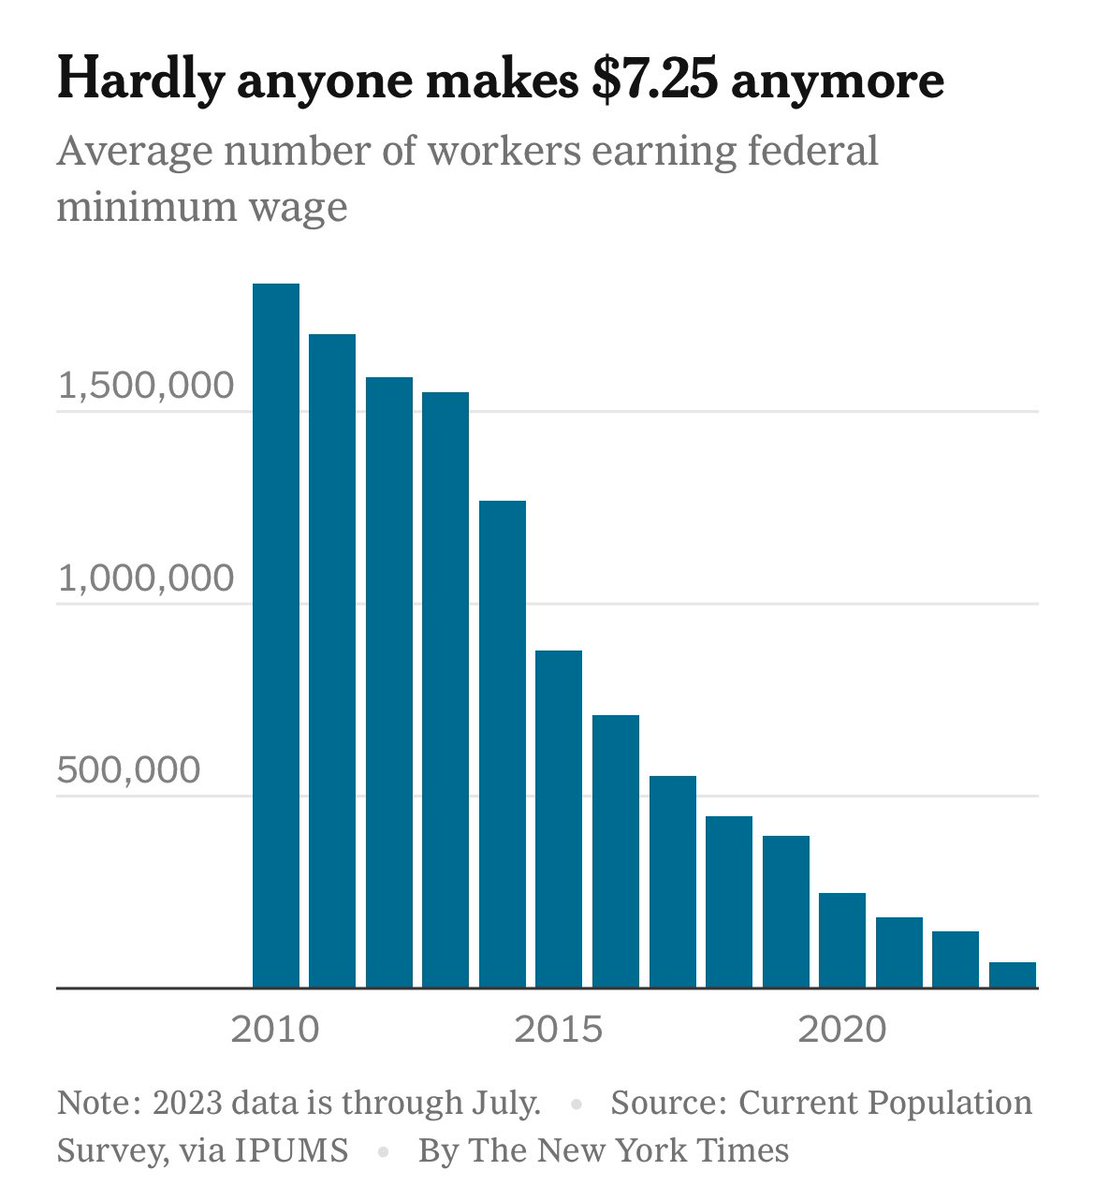 People don't really seem to have internalized that $7.25 is such a low wage that the US functionally doesn't have a federal minimum anymore. Only about 68,000 people earned the federal minimum wage in the first seven months of 2023, less than one in 1,000 workers (0.1%).